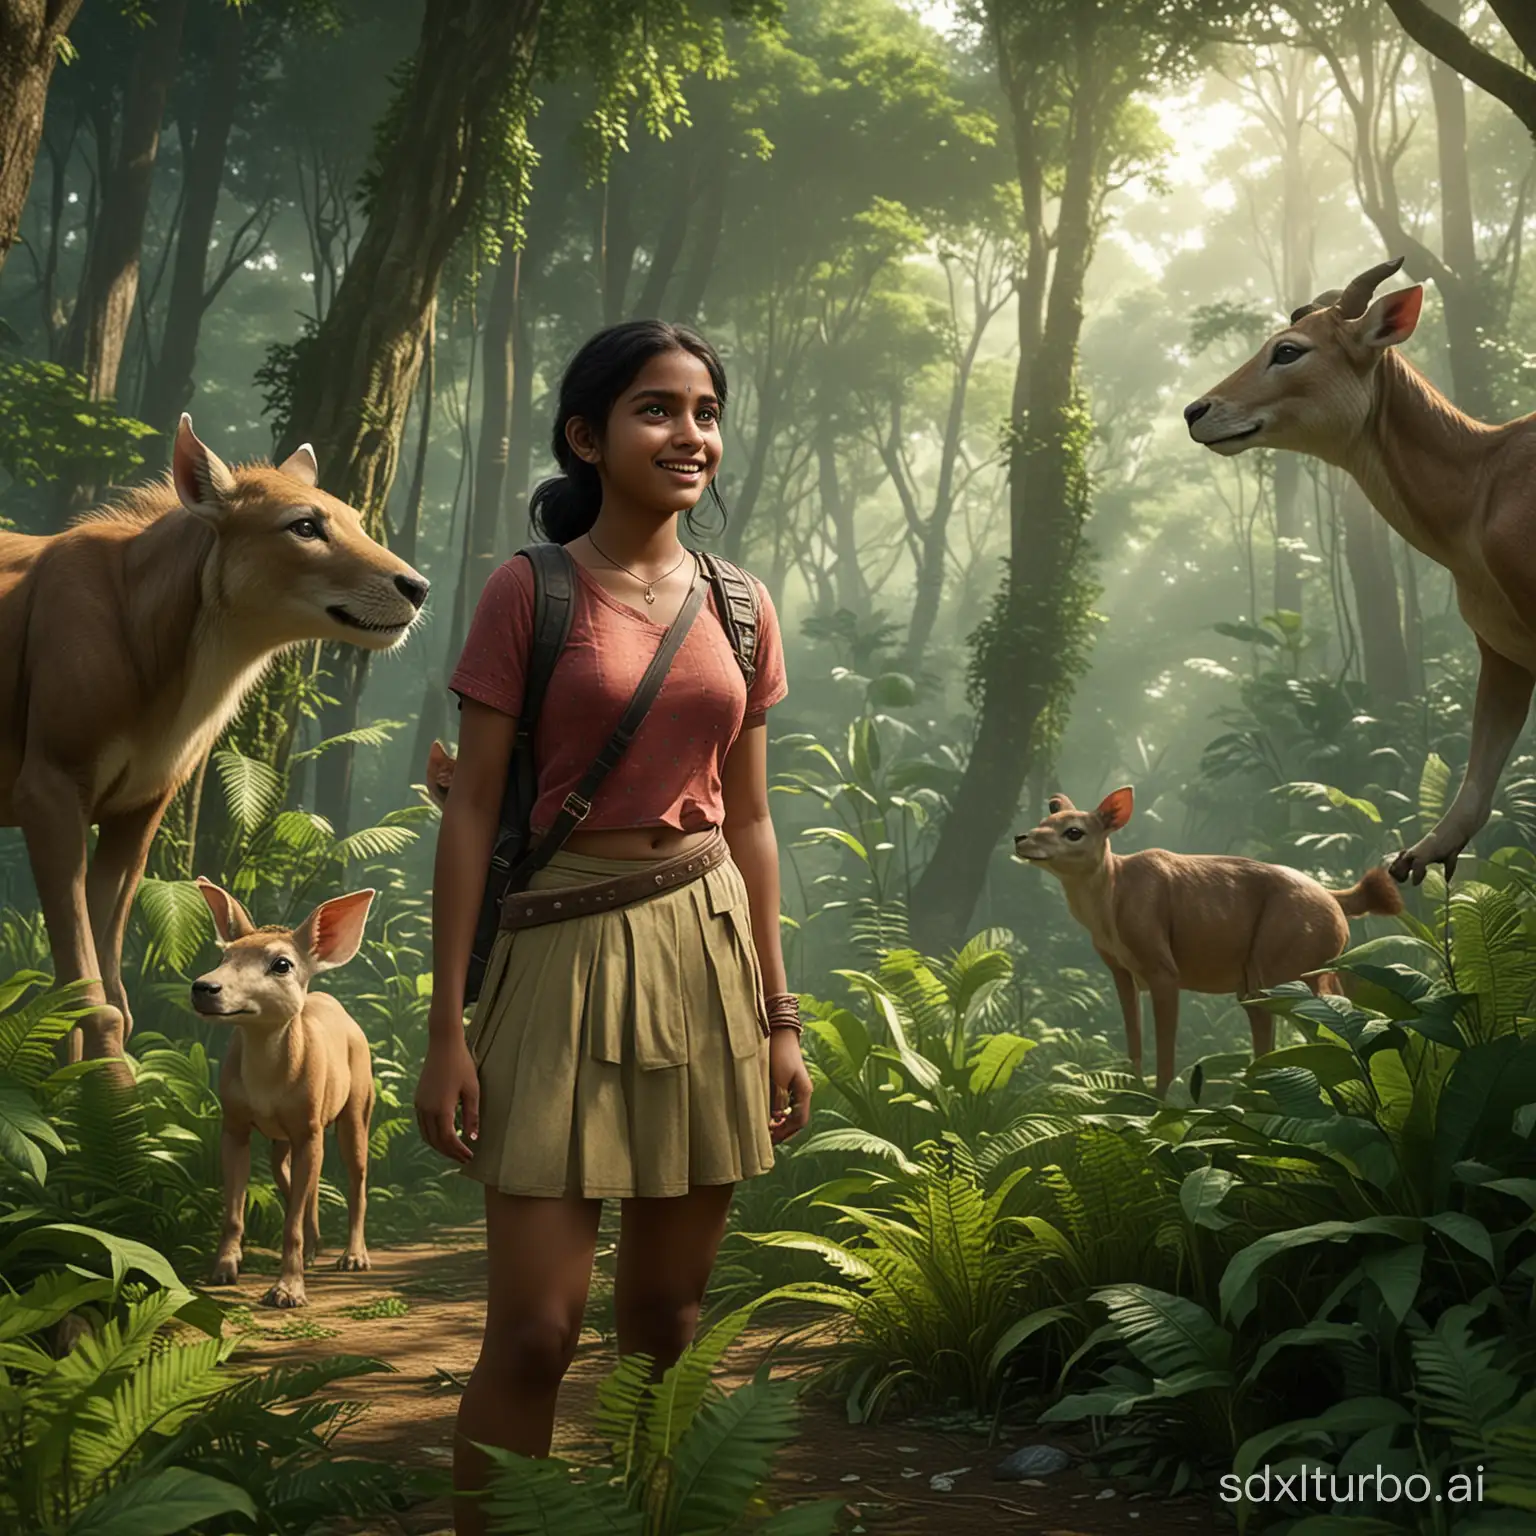 /imagine prompt: realistic, personality:a teen south indian girl Lily and her animal friends venture into the dense forest, encountering magical creatures and breathtaking sights. Laughter and joy fill the scene as they explore together, creating unforgettable memories amidst the lush greenery of the forest.unreal engine, hyper real --q 2 --v 5.2 --ar 16:9